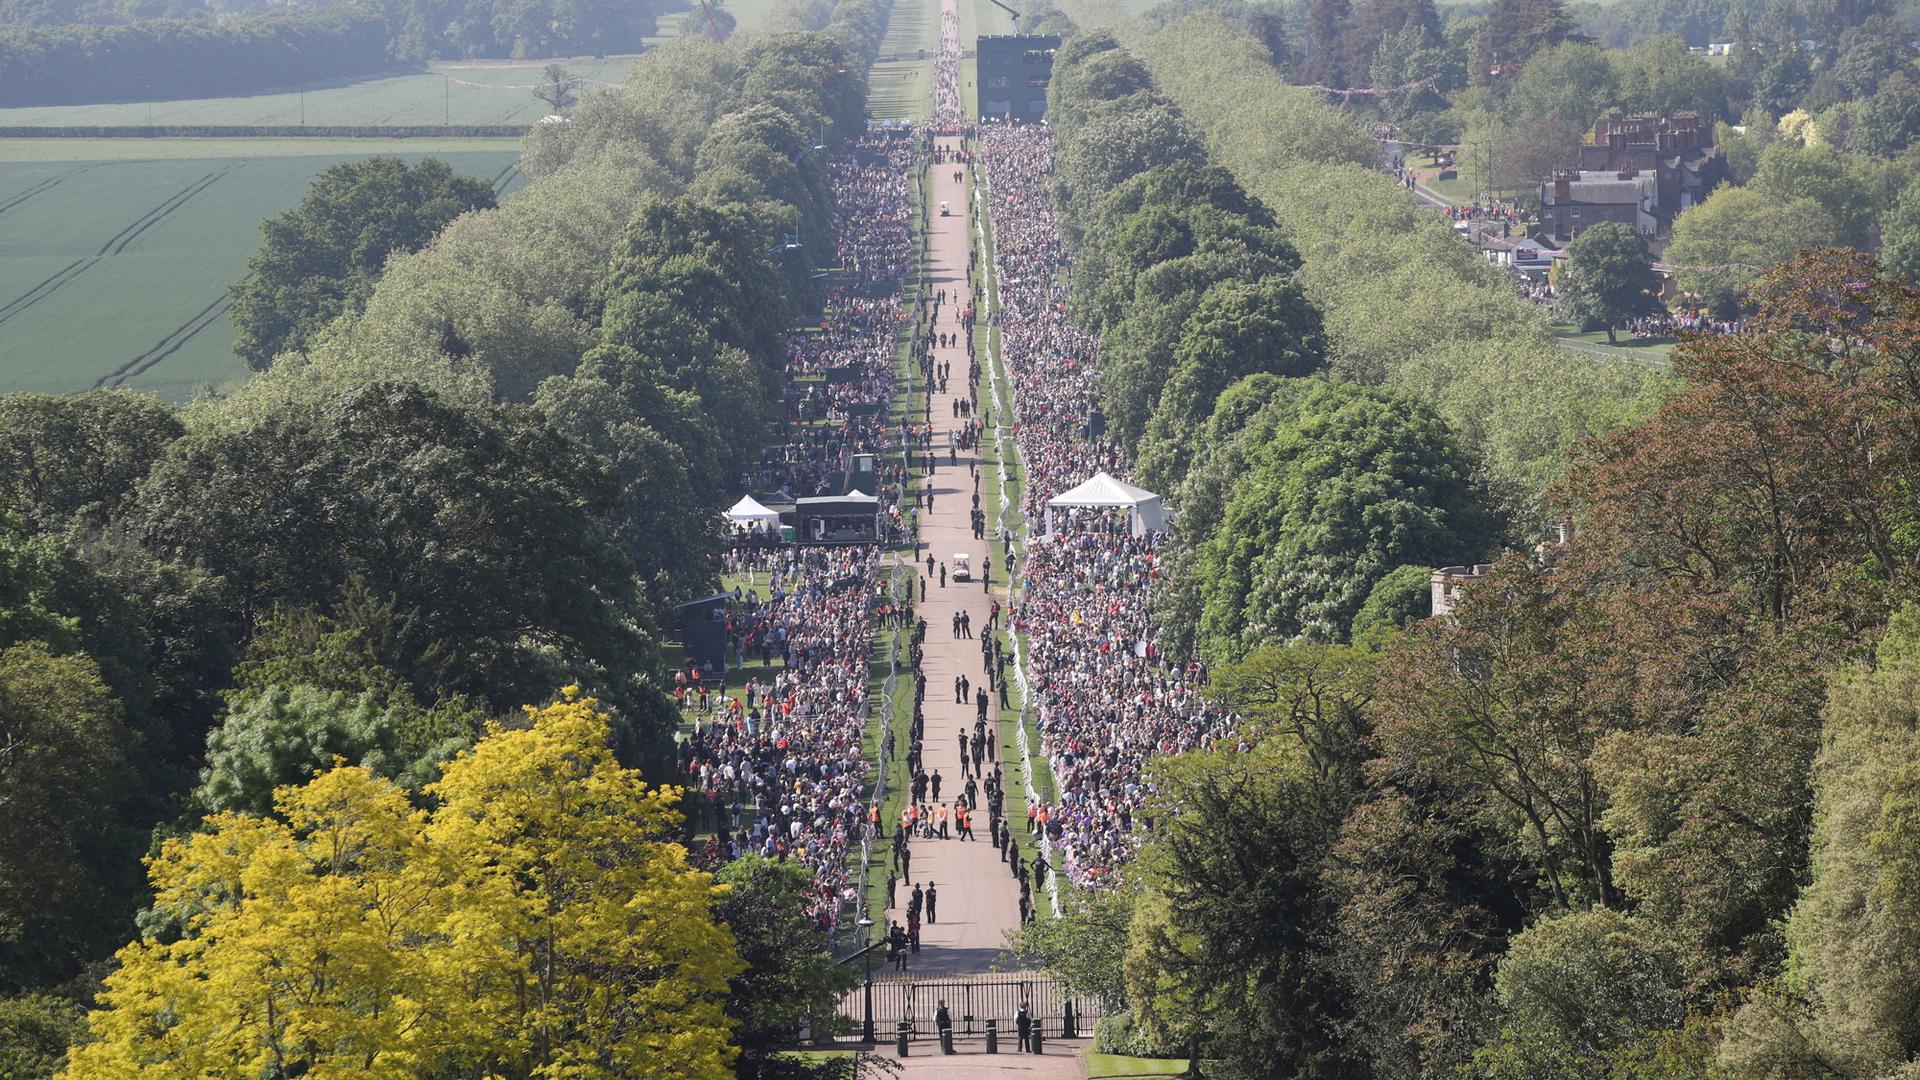 An aerial photo shows a road lined with thousands of people. To the right, is a stone castle.